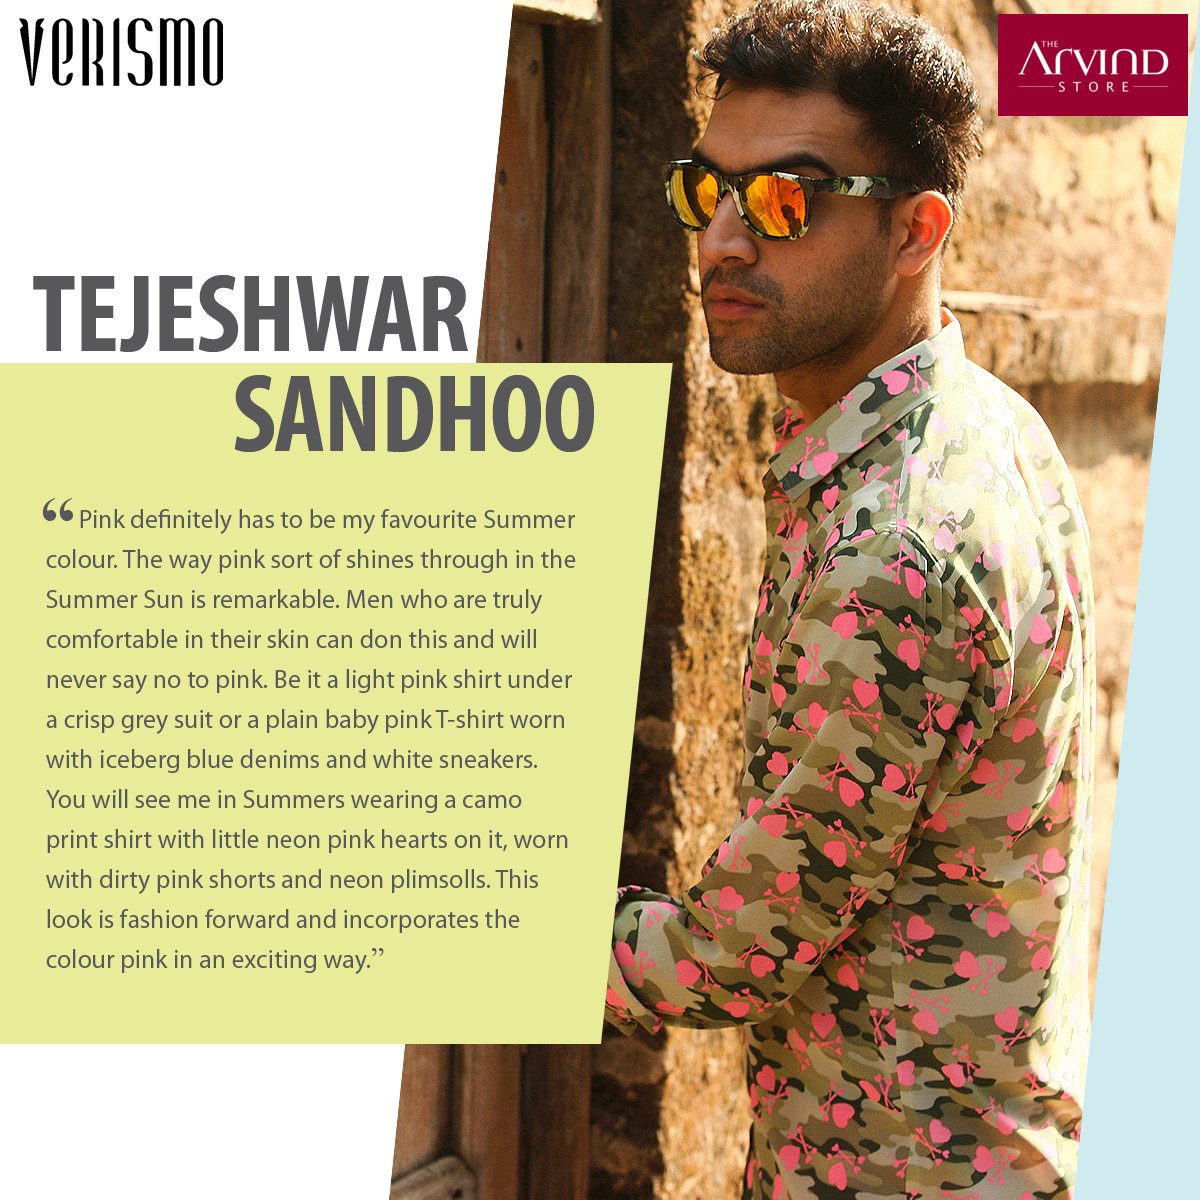 Here’s what #FashionBlogger Tejeshwar Sandhoo of @bblackout has to say about his favourite summer colour. https://t.co/vpgGXqlJZZ